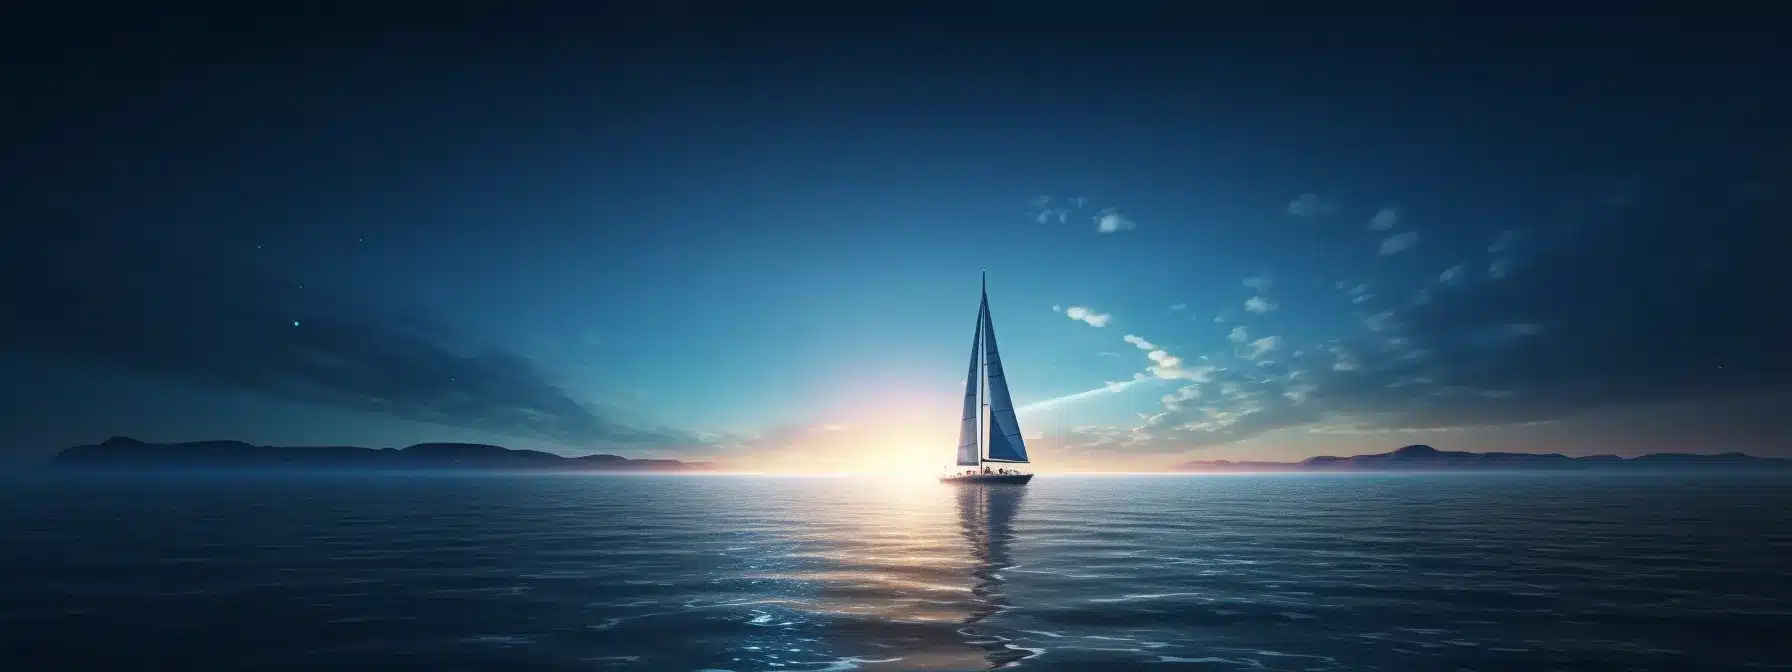 A Sailboat Floating On A Calm Ocean, With A Shining Star Guiding Its Way.